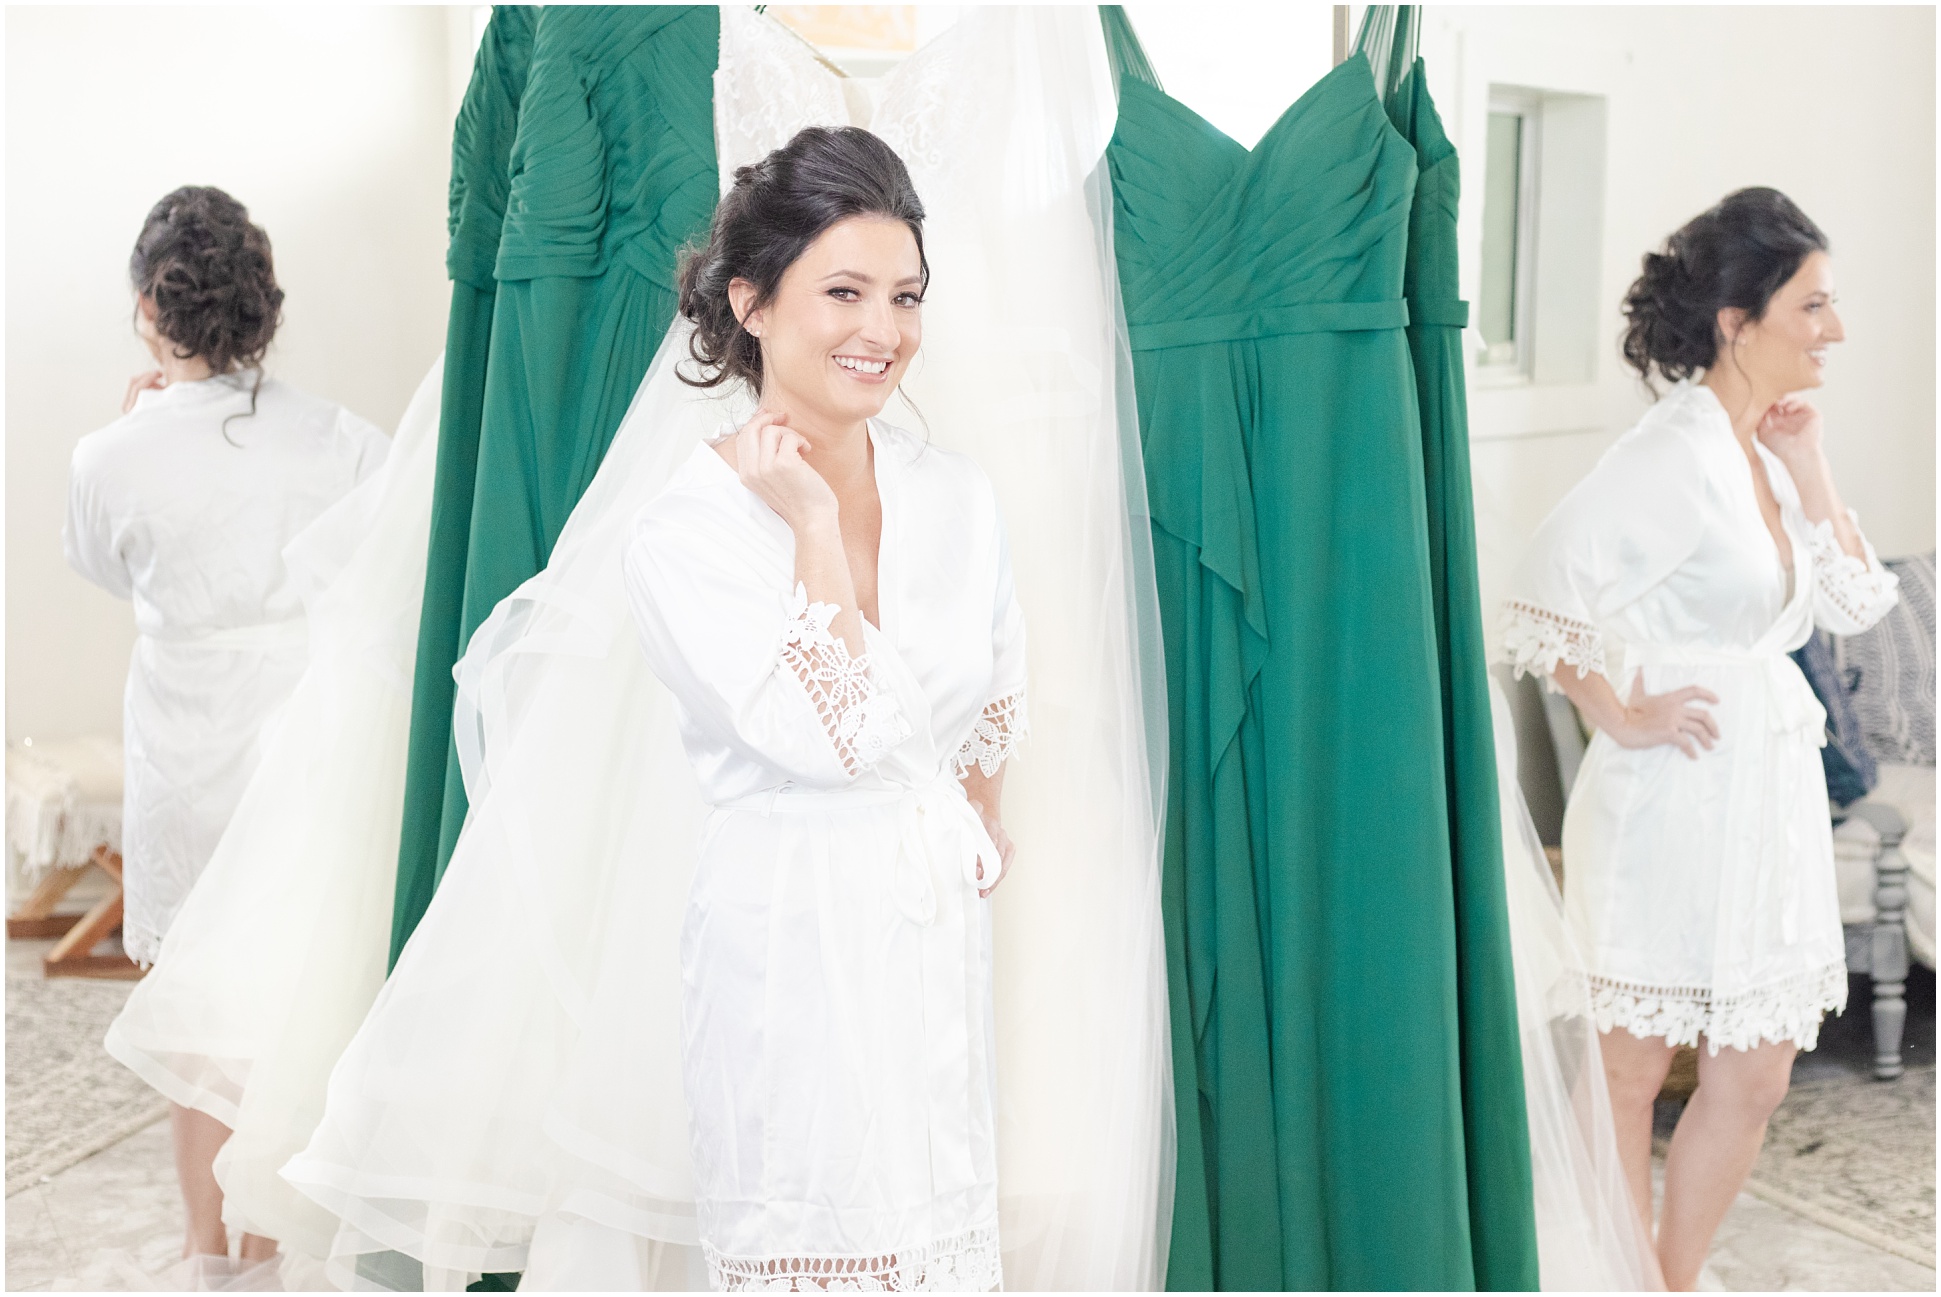 bride standing in front of wedding dress framed by bridesmaids green dresses 